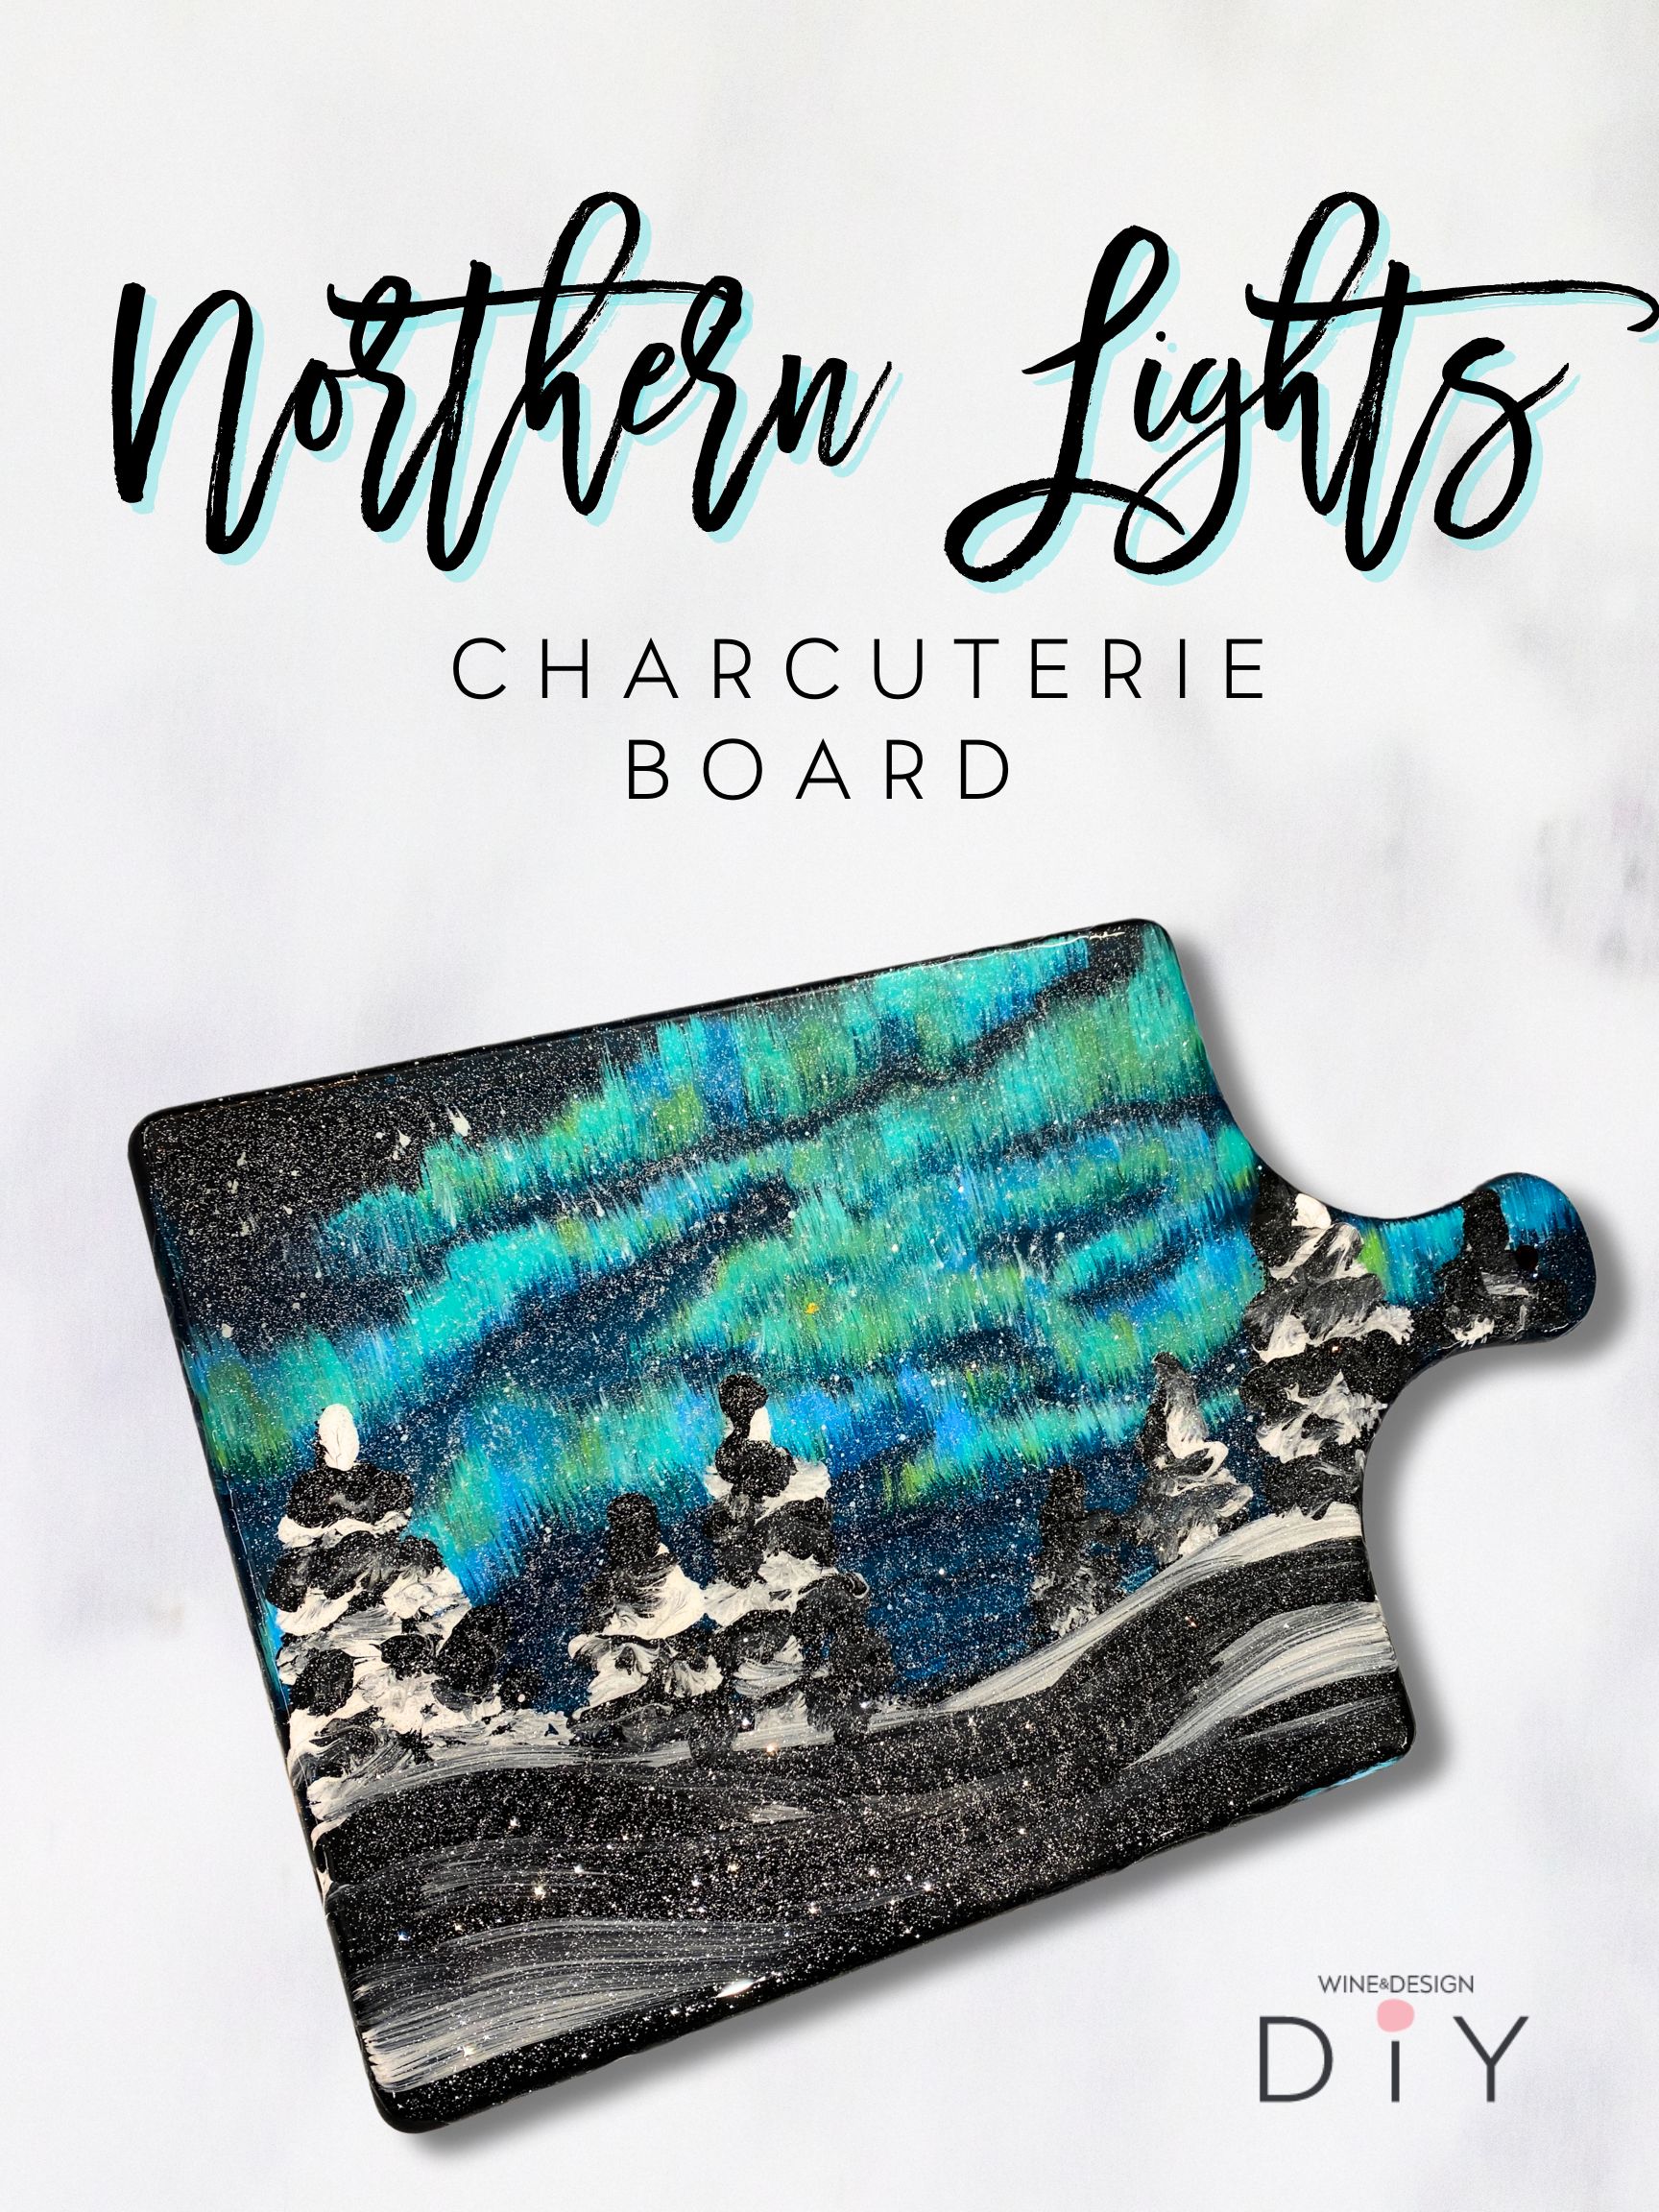 7 SEATS LEFT! NEW! Northern Lights Charcuterie Board